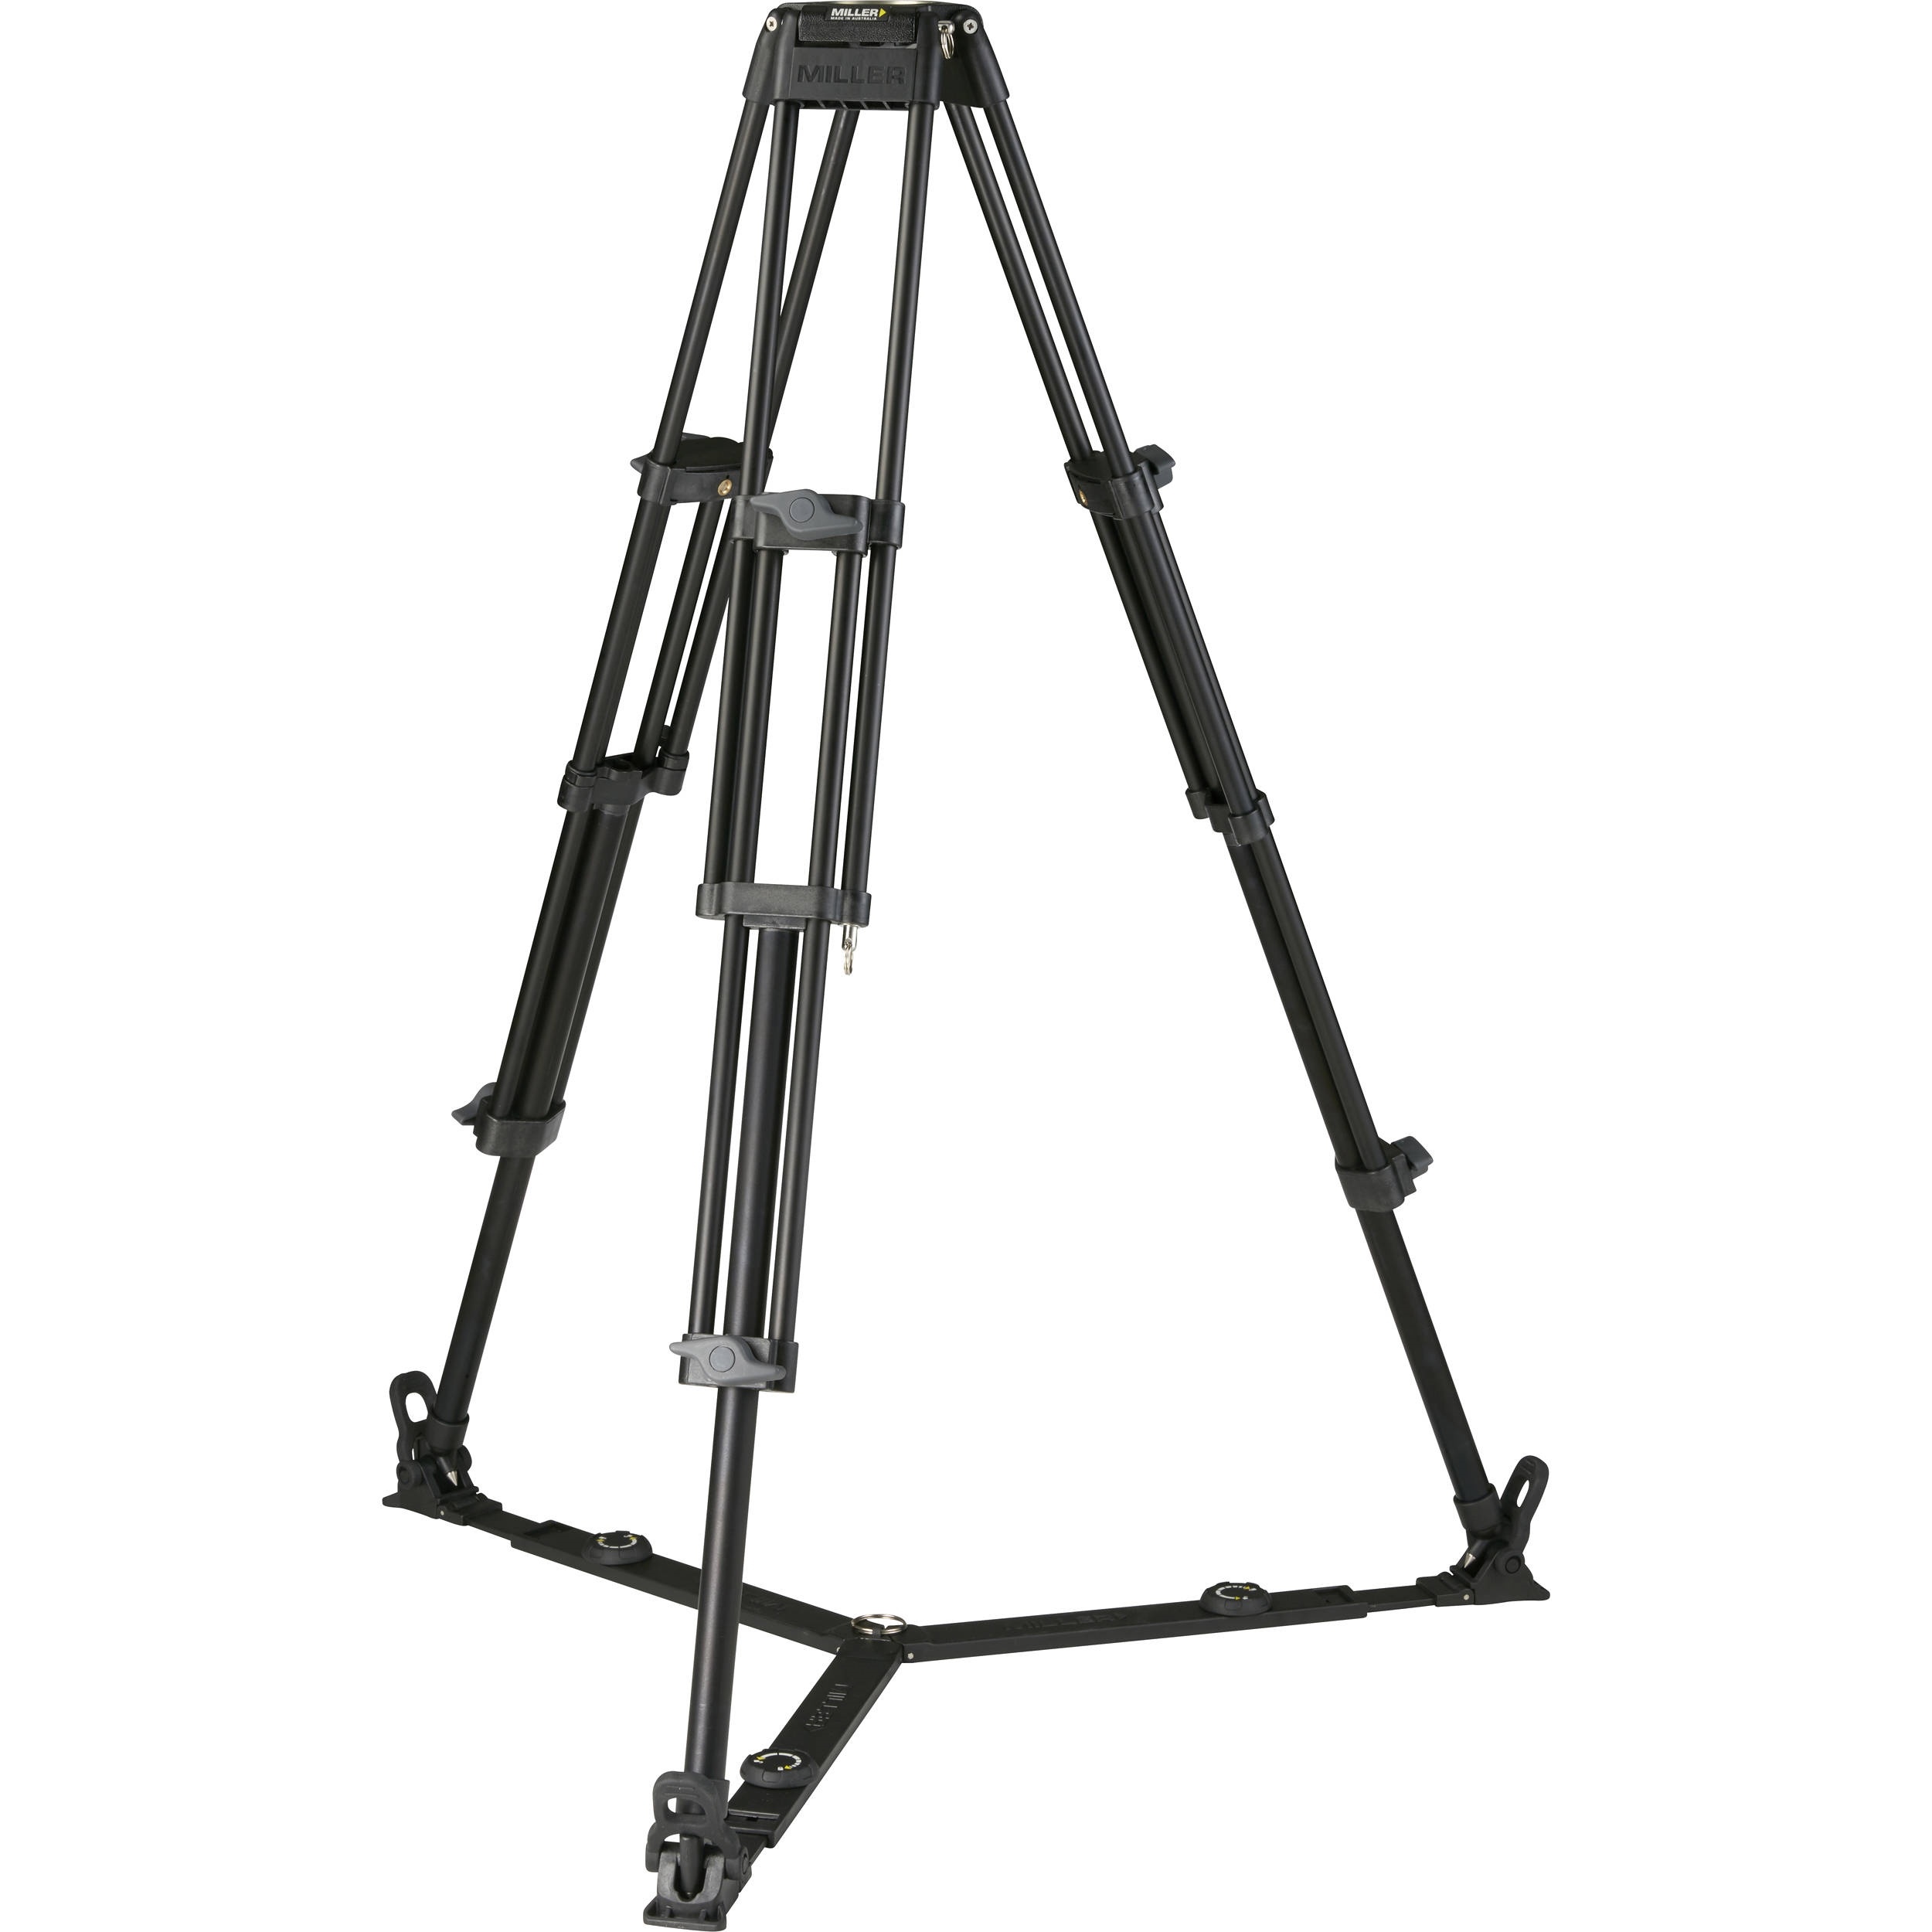 Miller 420G Toggle 2-St Alloy Tripod with Ground Spreader (411)